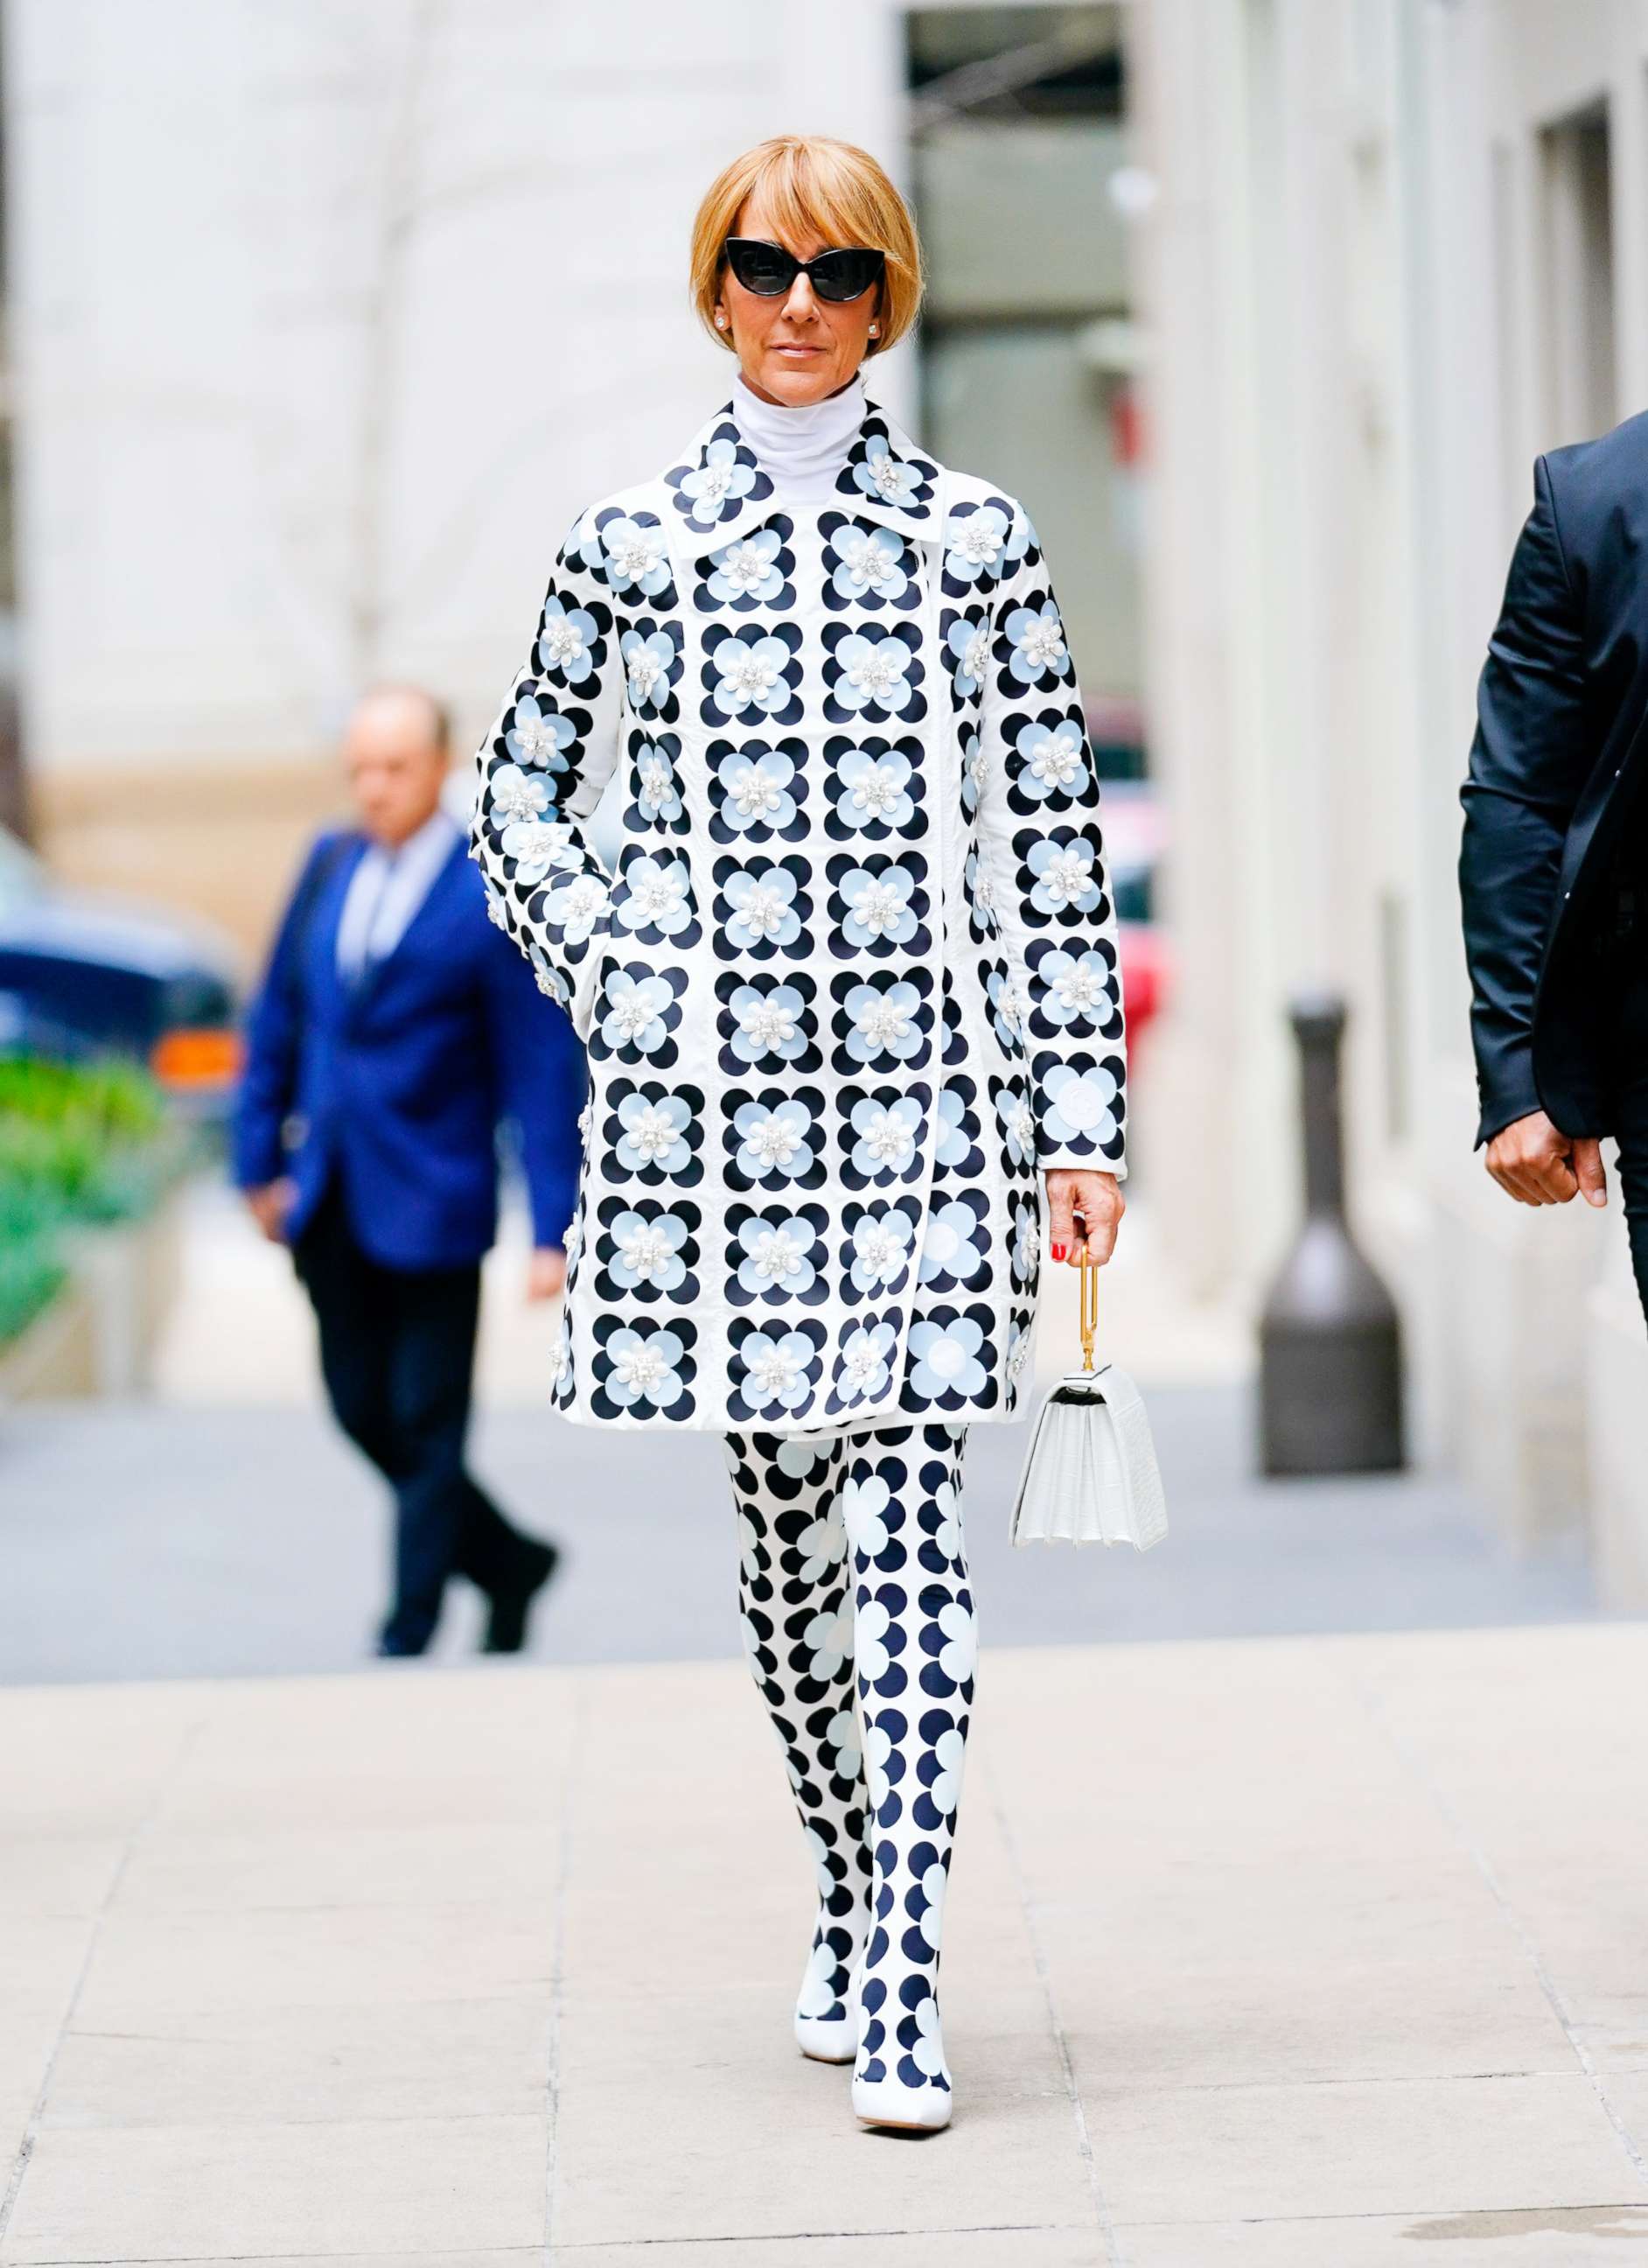 PHOTO: Celine Dion wears Moncler Richard Quinn Fall 2020 on March 3, 2020 in New York City.